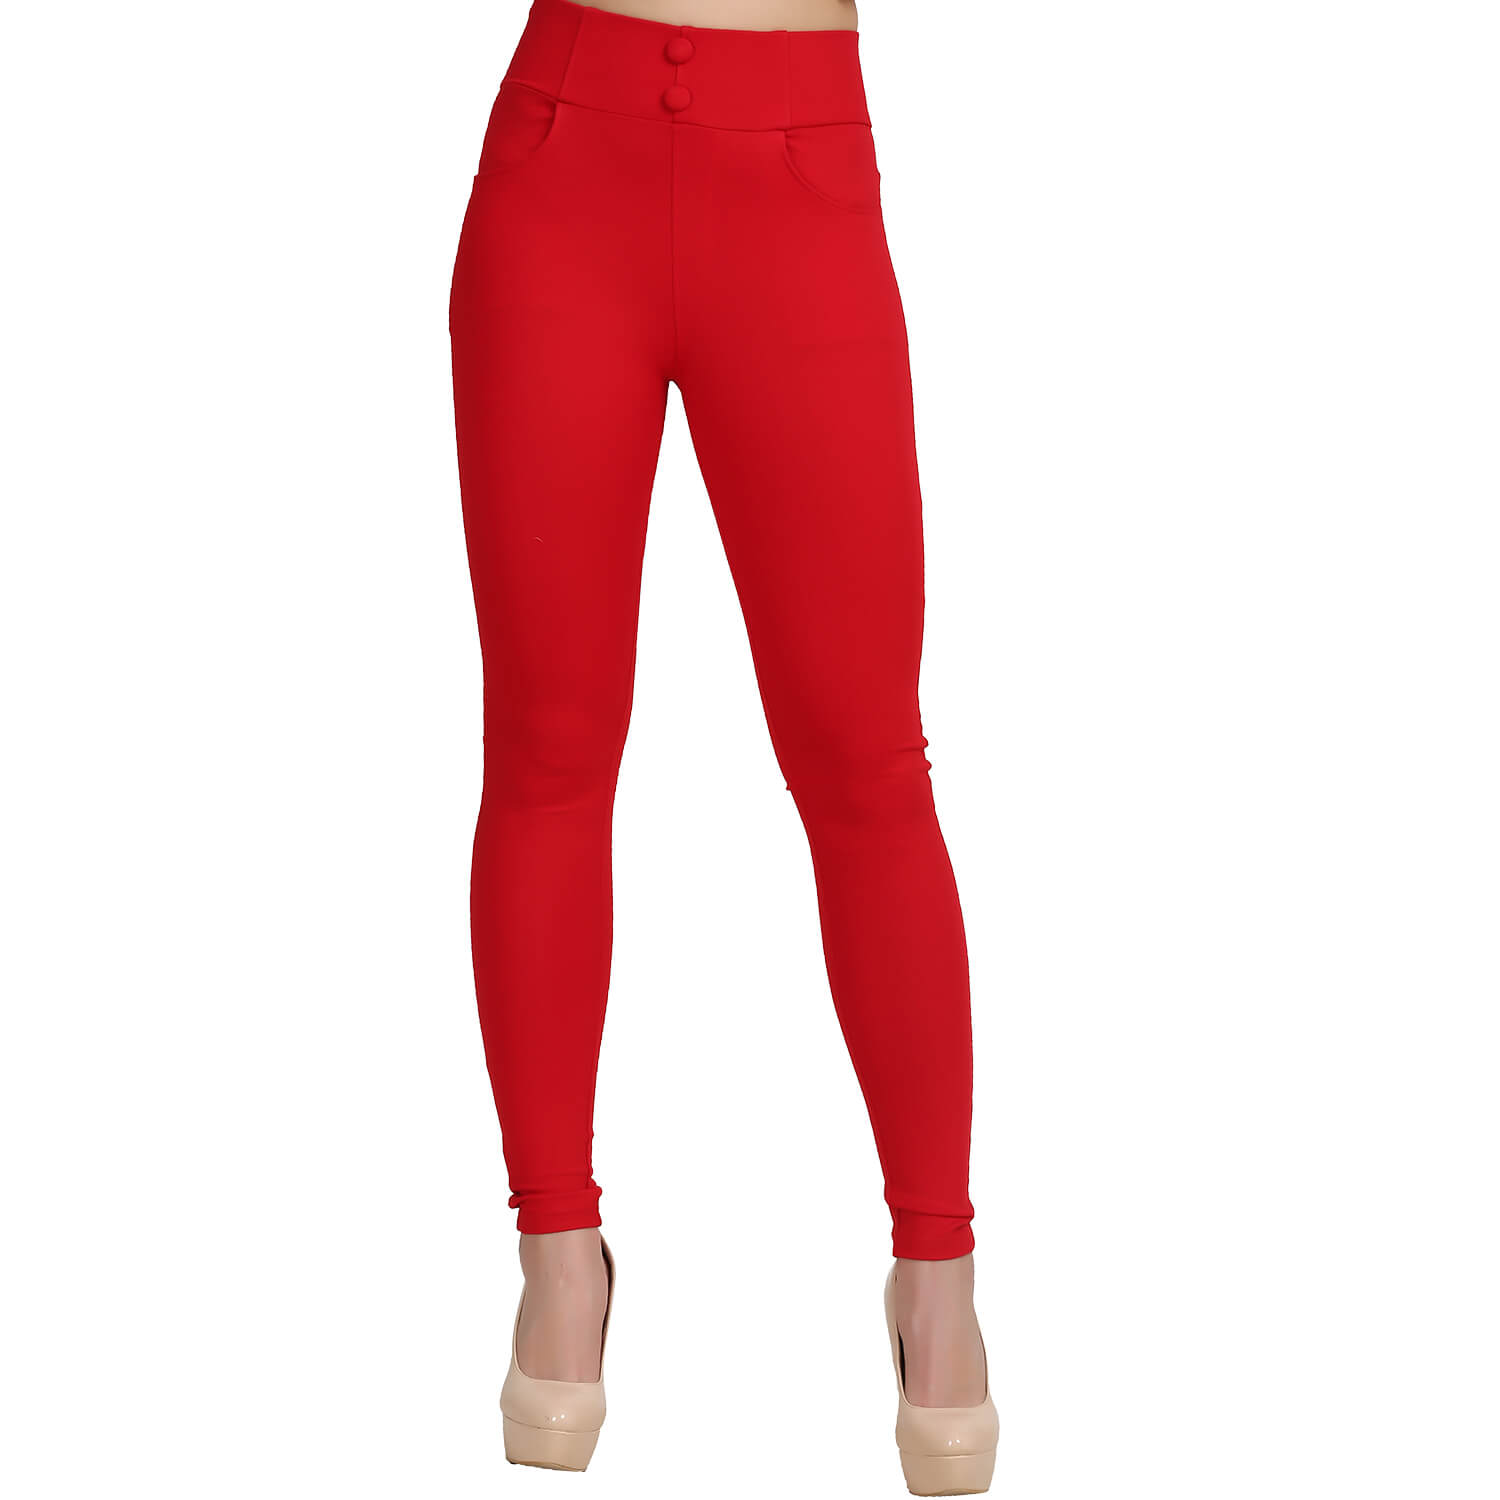 Red Jeggings - Buy Red Jeggings Online Starting at Just ₹176